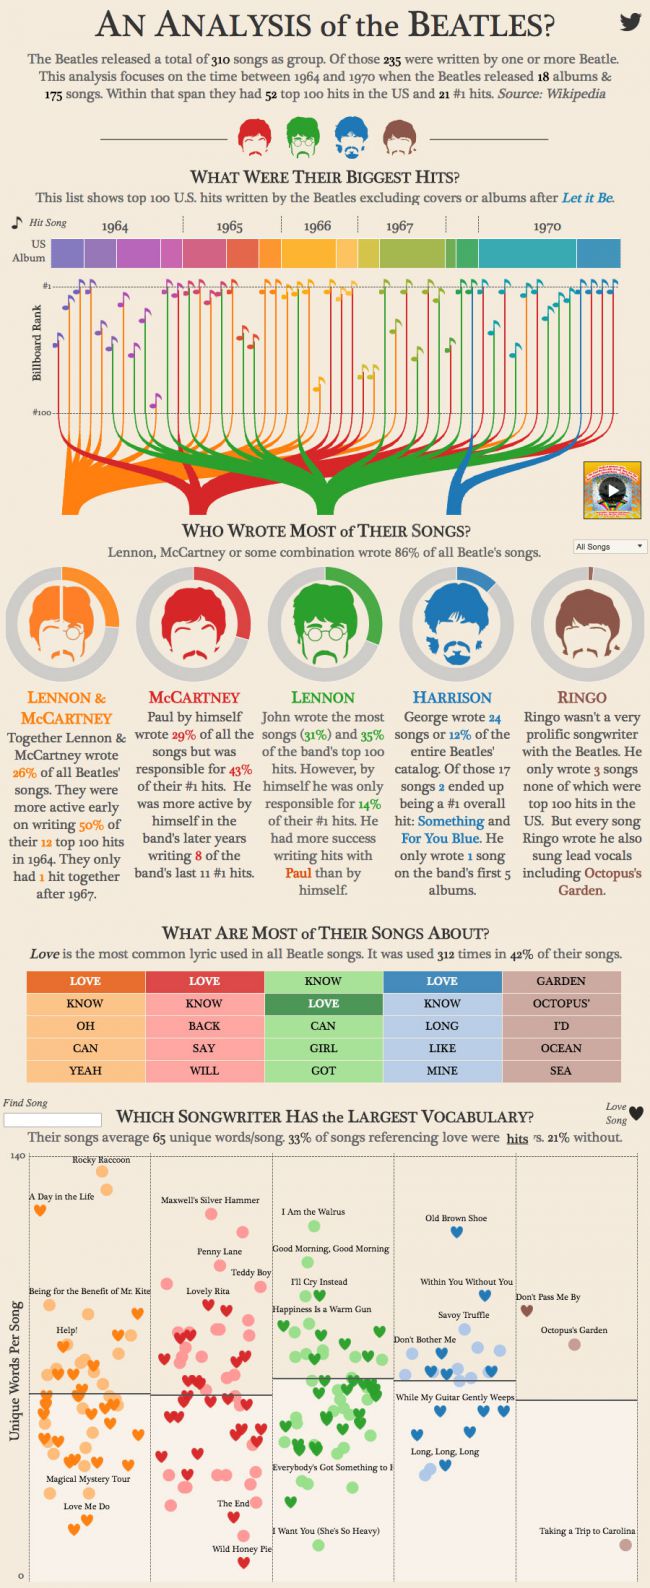 An infographic showing songs written by The Beatles between 1964 and 1970